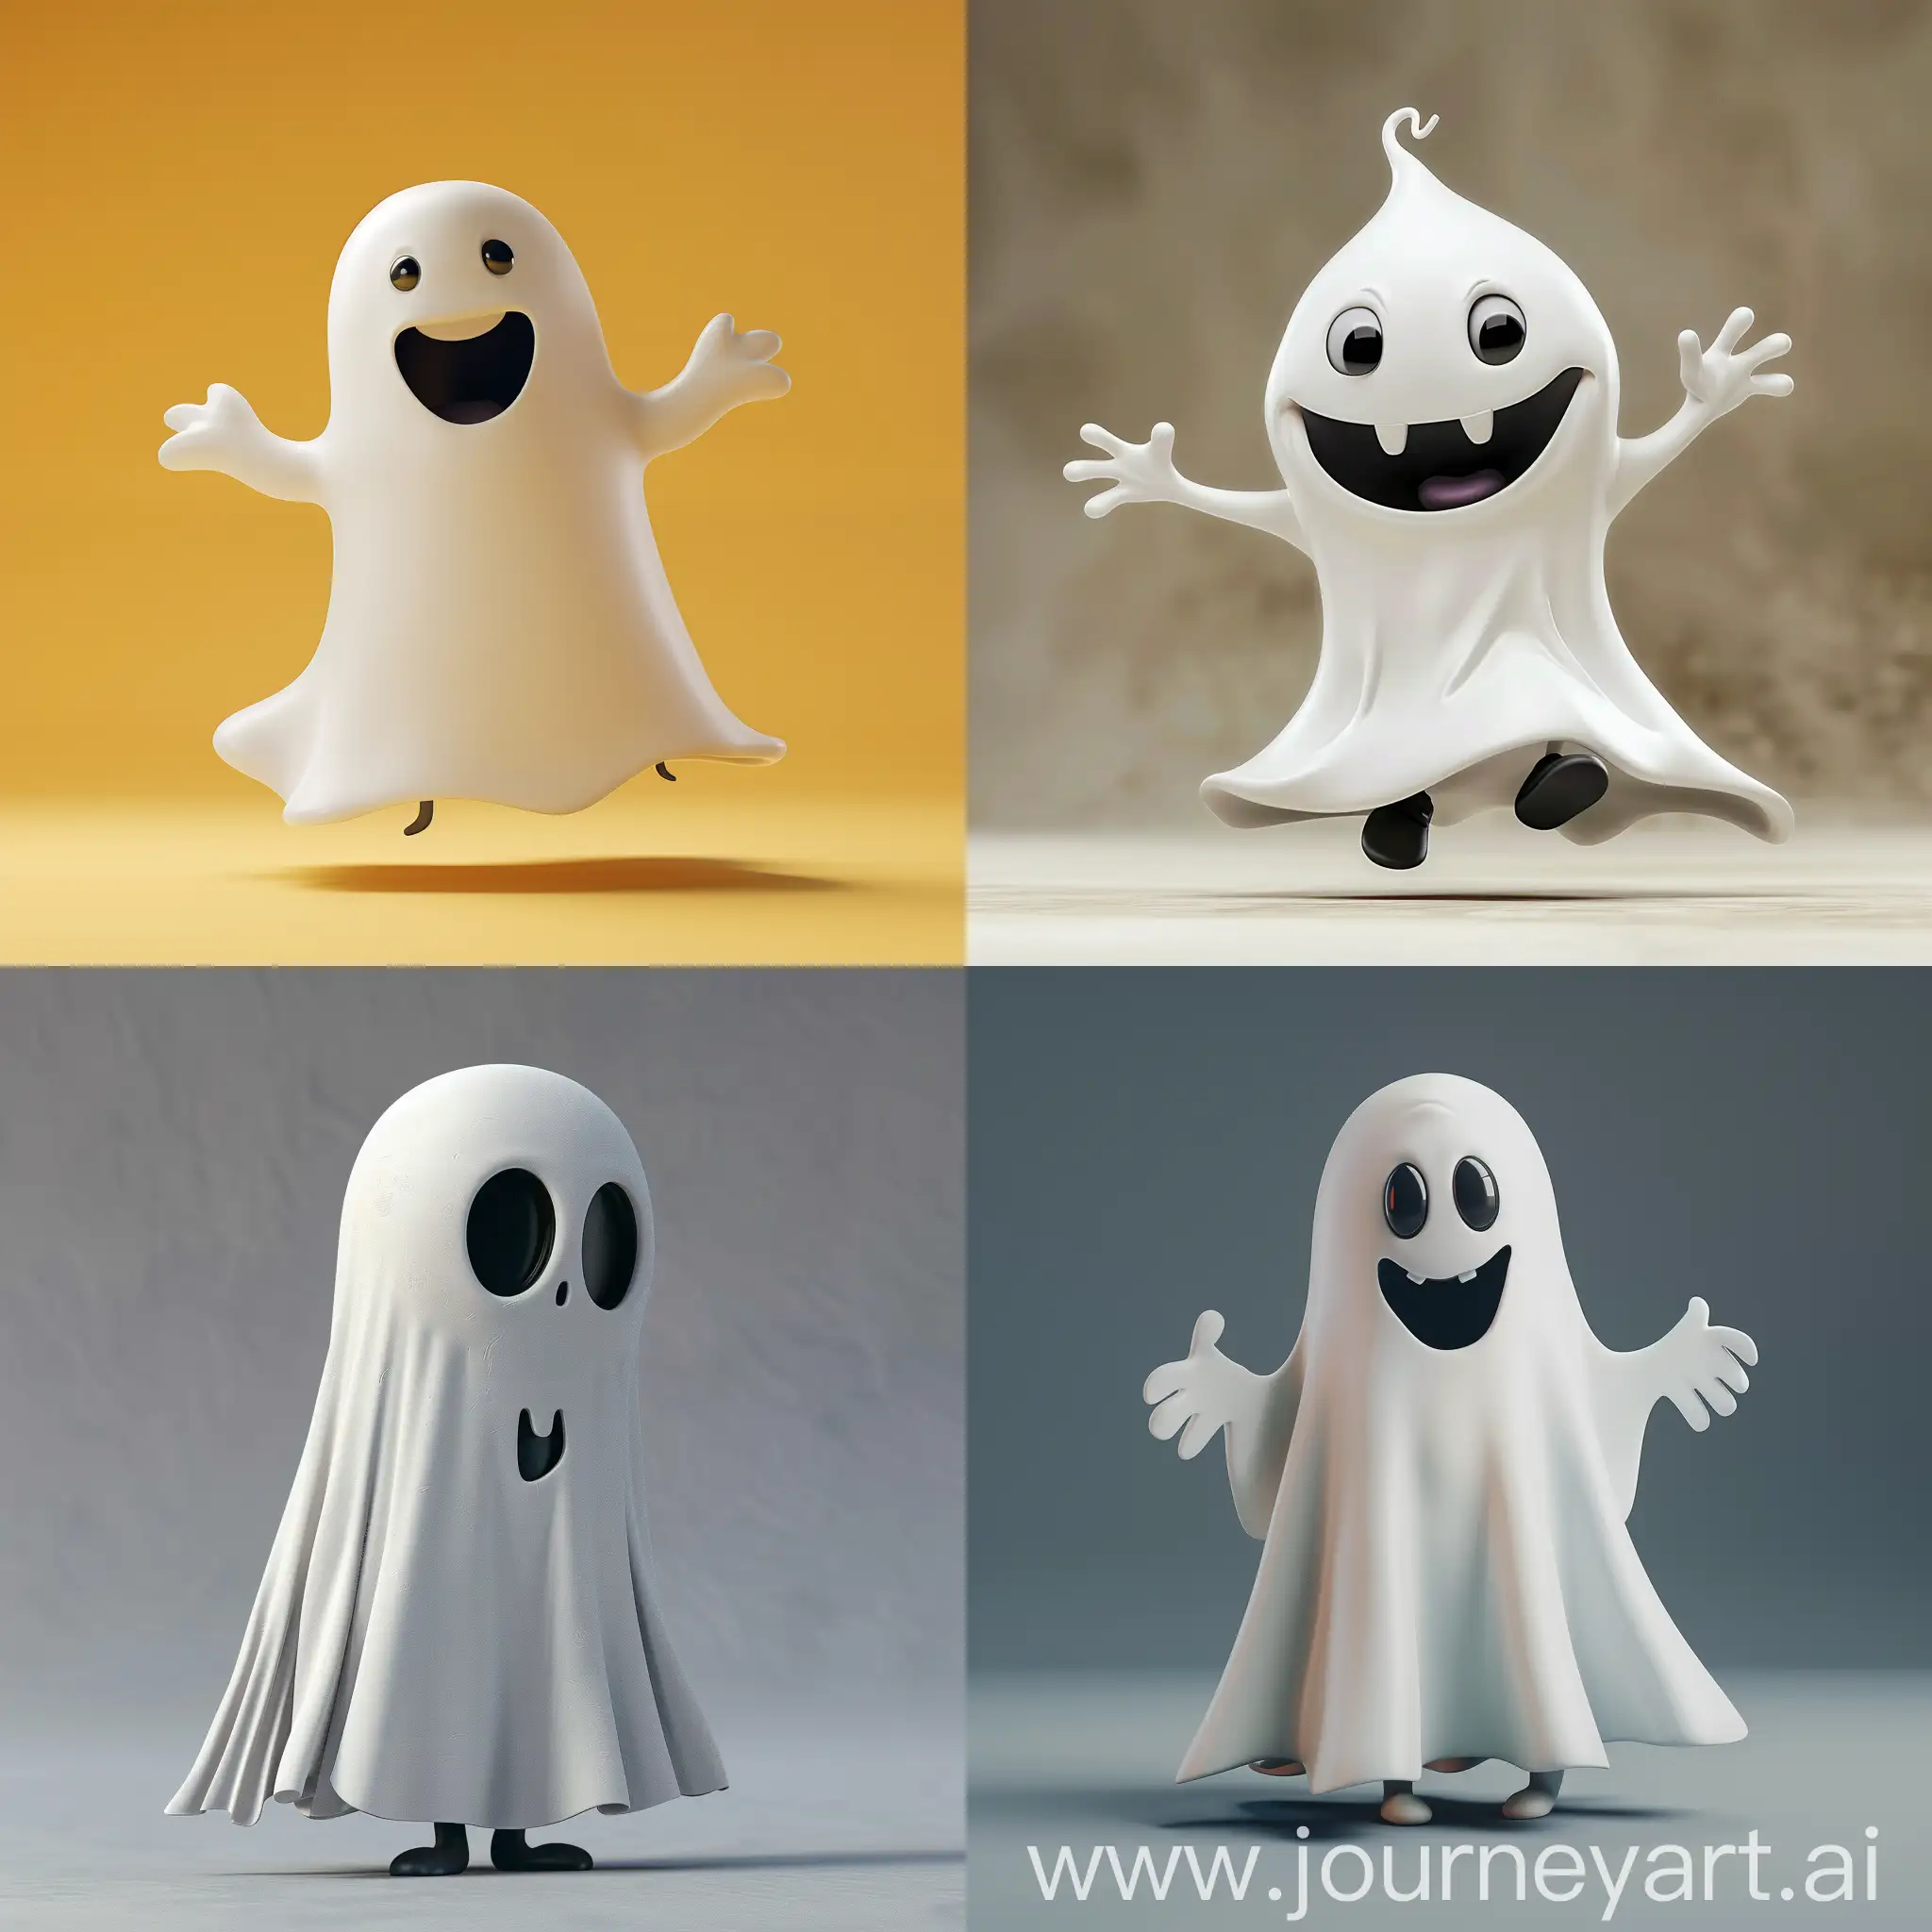 Playful-Ghost-Character-with-Quirky-Expressions